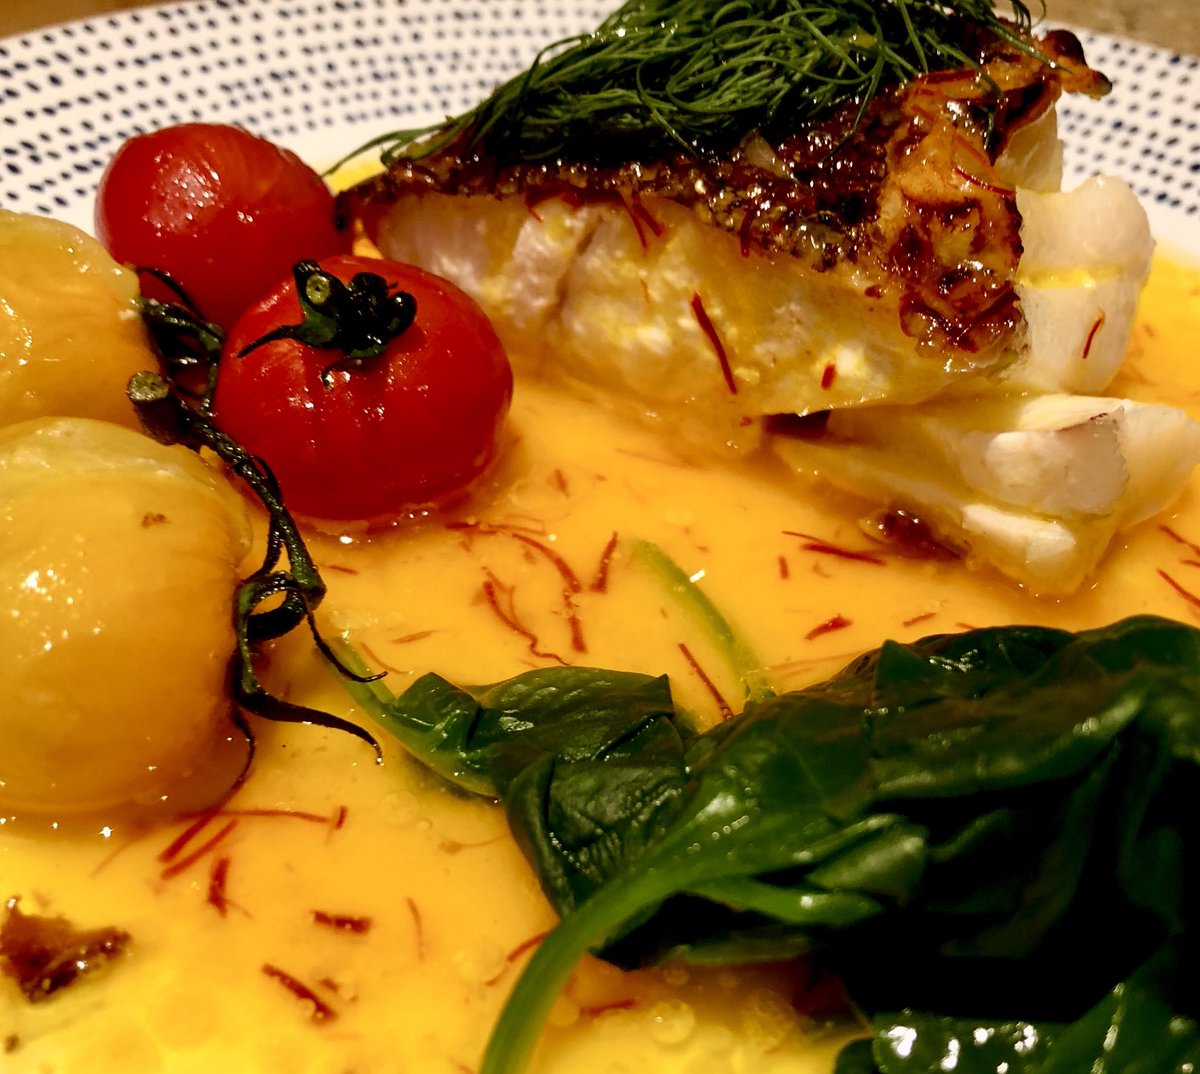 Pan Cooked Halibut in a Saffron Sauce with Tomatoes & Watercress ⁦@TheCat_Max⁩ ⁦@Averyslondon⁩